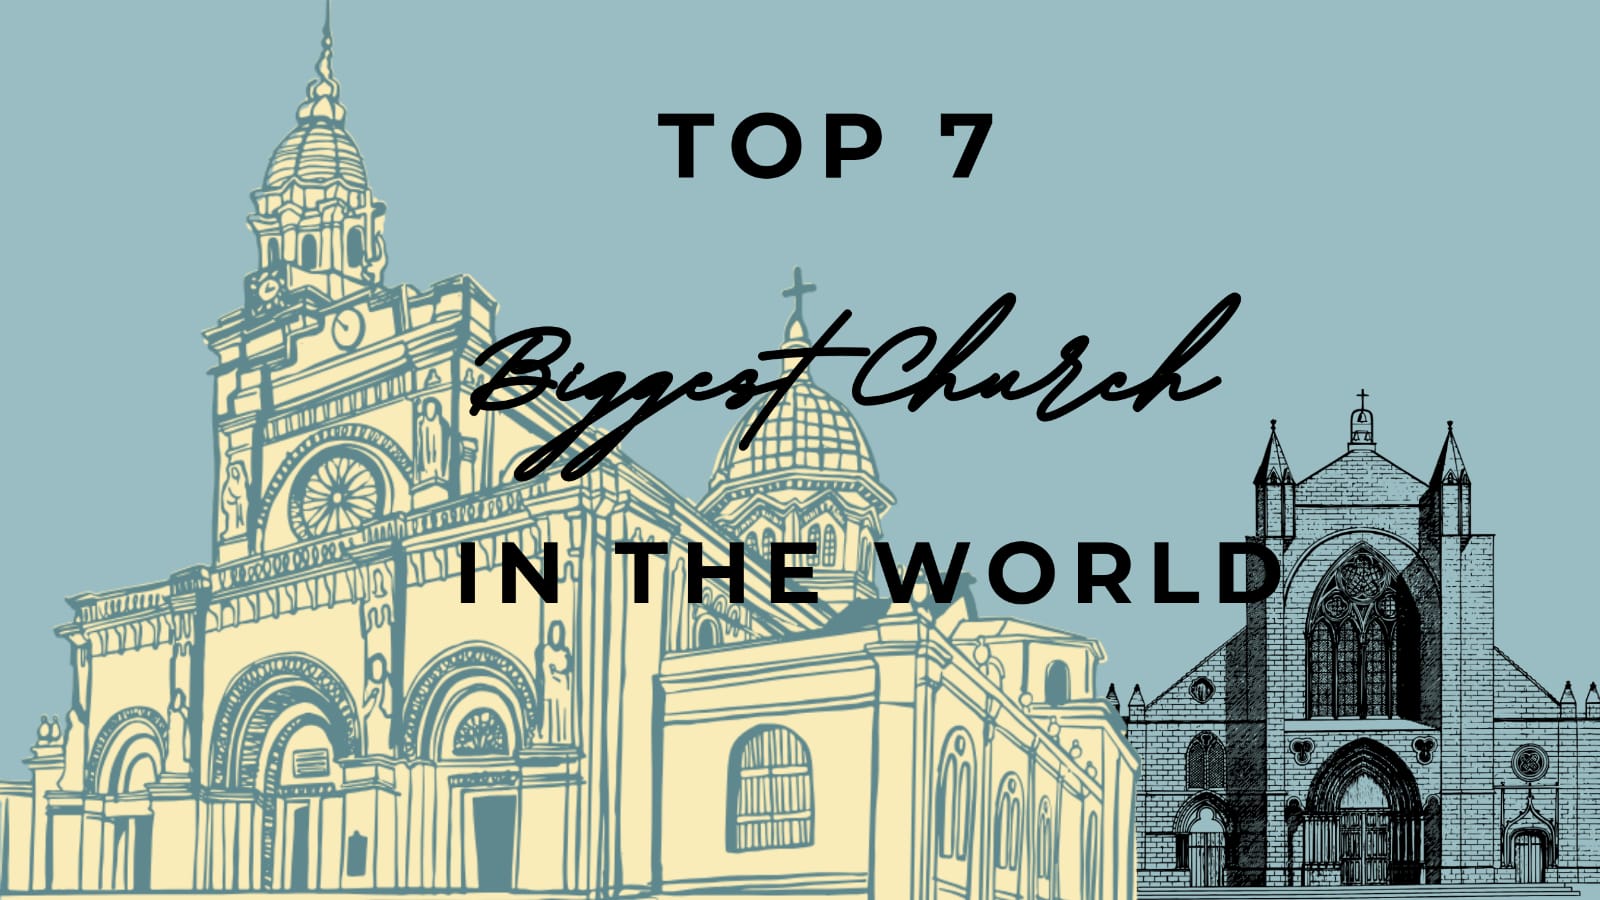 Top 7 Biggest Church in the World